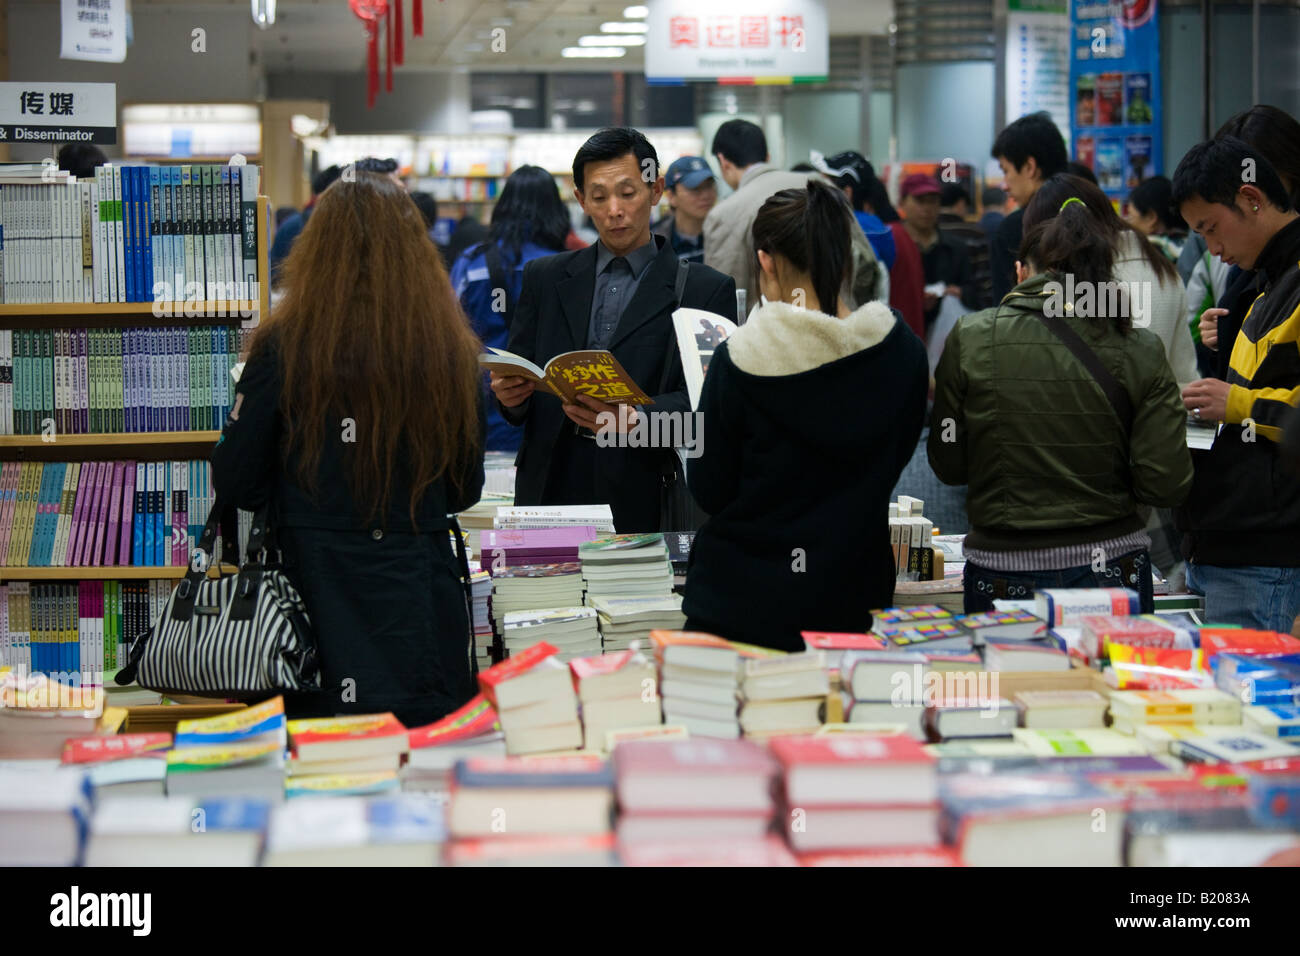 Shoppers in Beijing book shop China Stock Photo